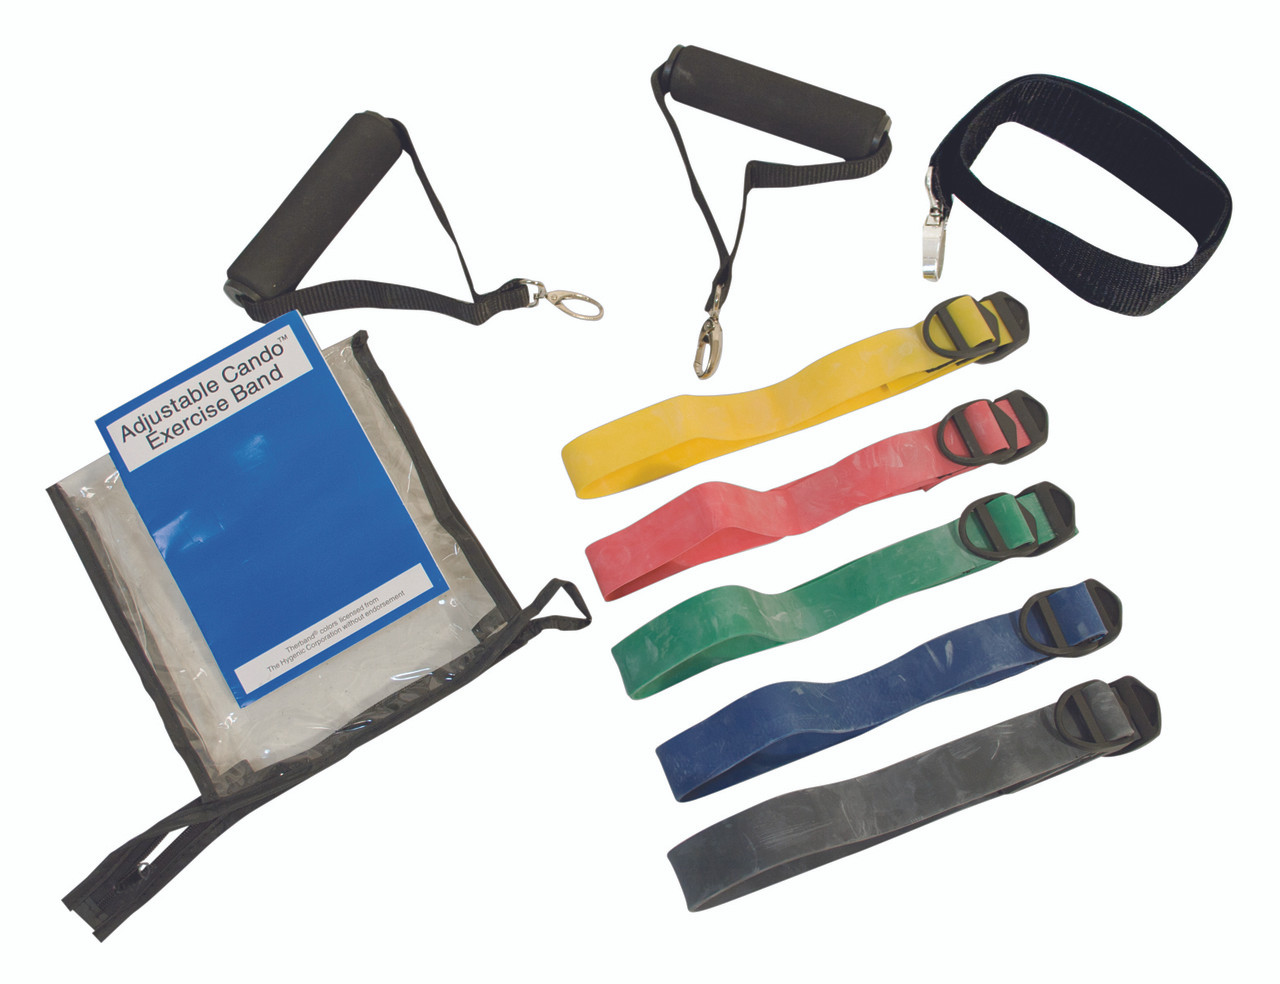 CanDo¨ Adjustable Exercise Band Kit - 5 band (yellow, red, green, blue, black)